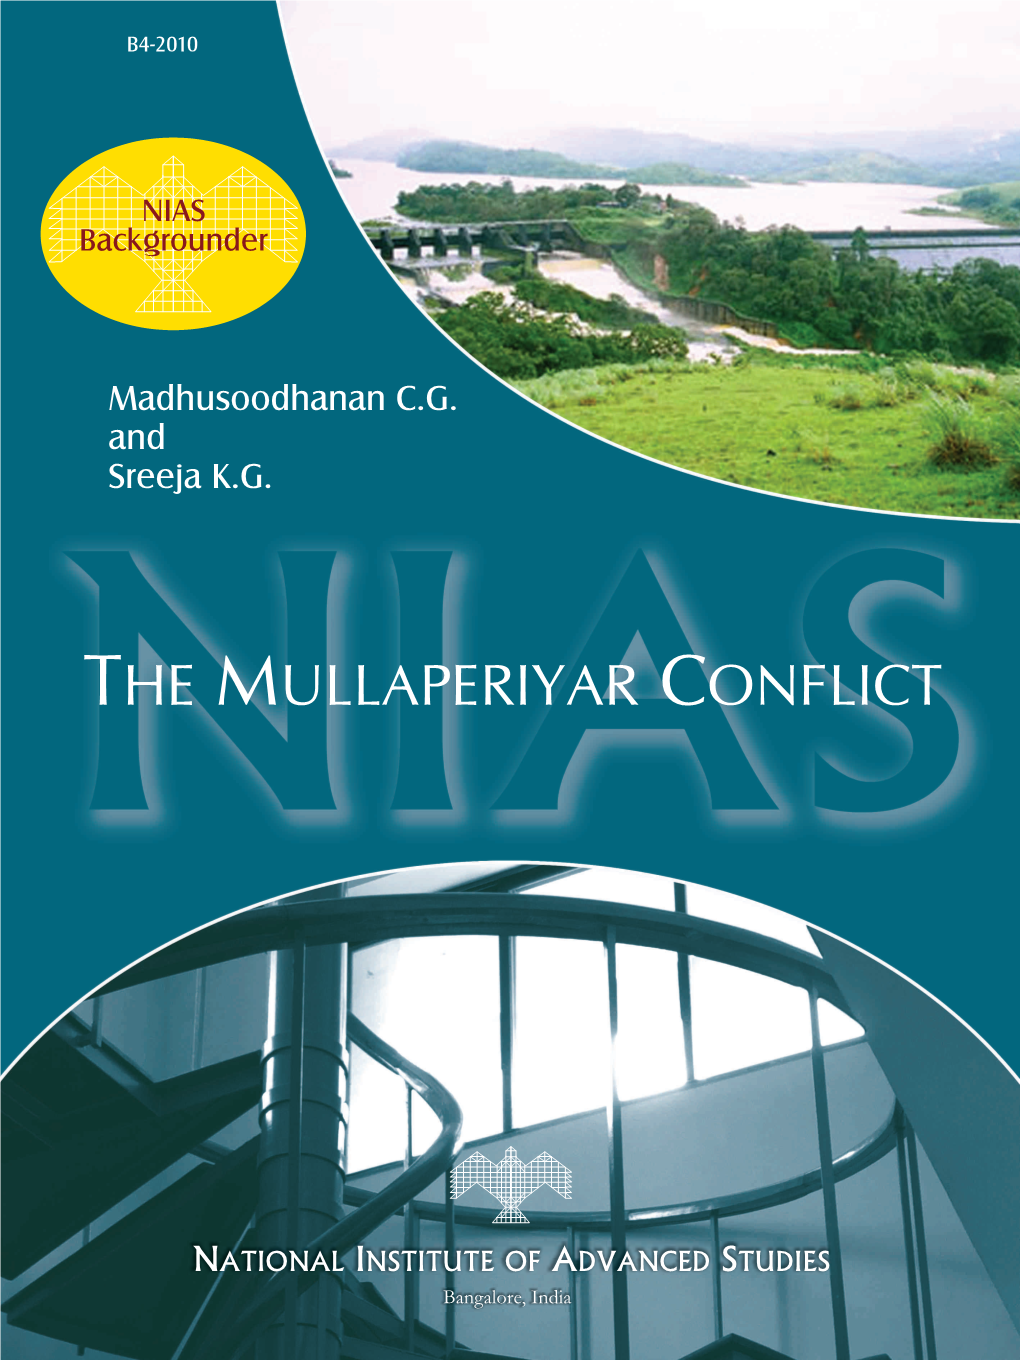 The Mullaperiyar Conflict